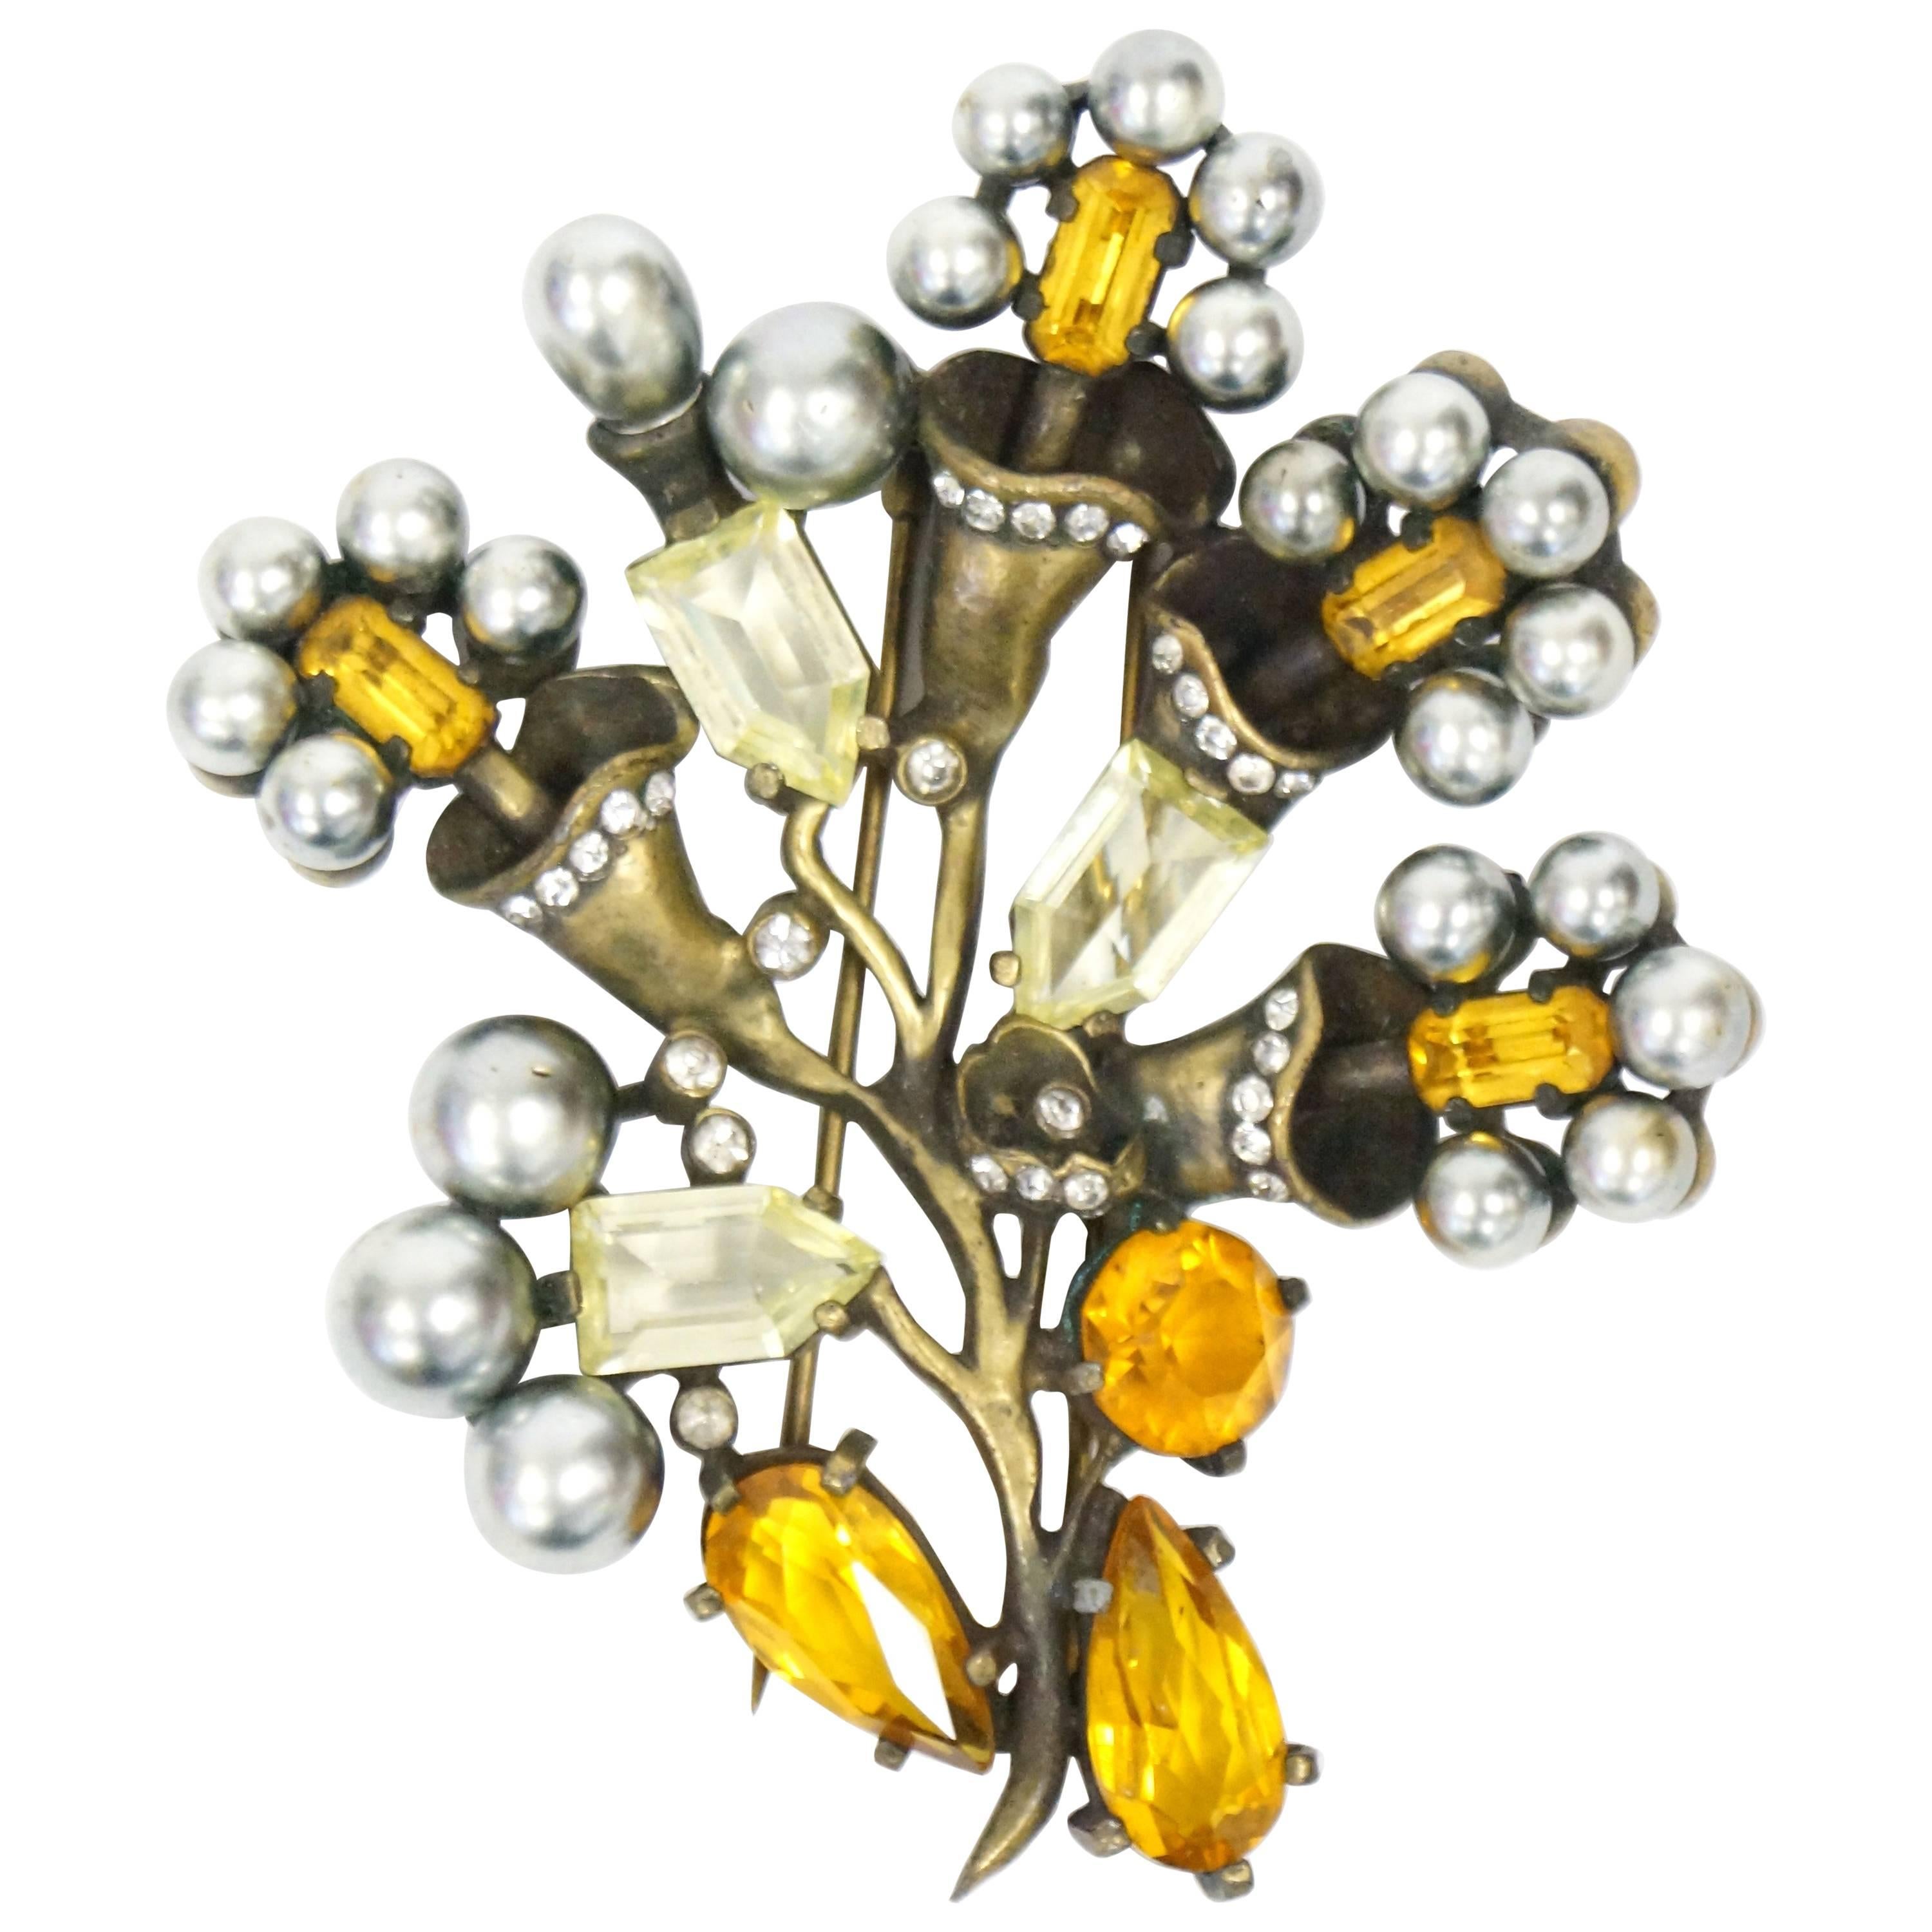 Beautiful rhinestone and faux pearl fur clip by Eisenberg. The four blooming flowers and two buds sprout from an antique brass stem. The flowers have emerald cut orange rhinestone centers, each sporting five grey pearl petals. Small round